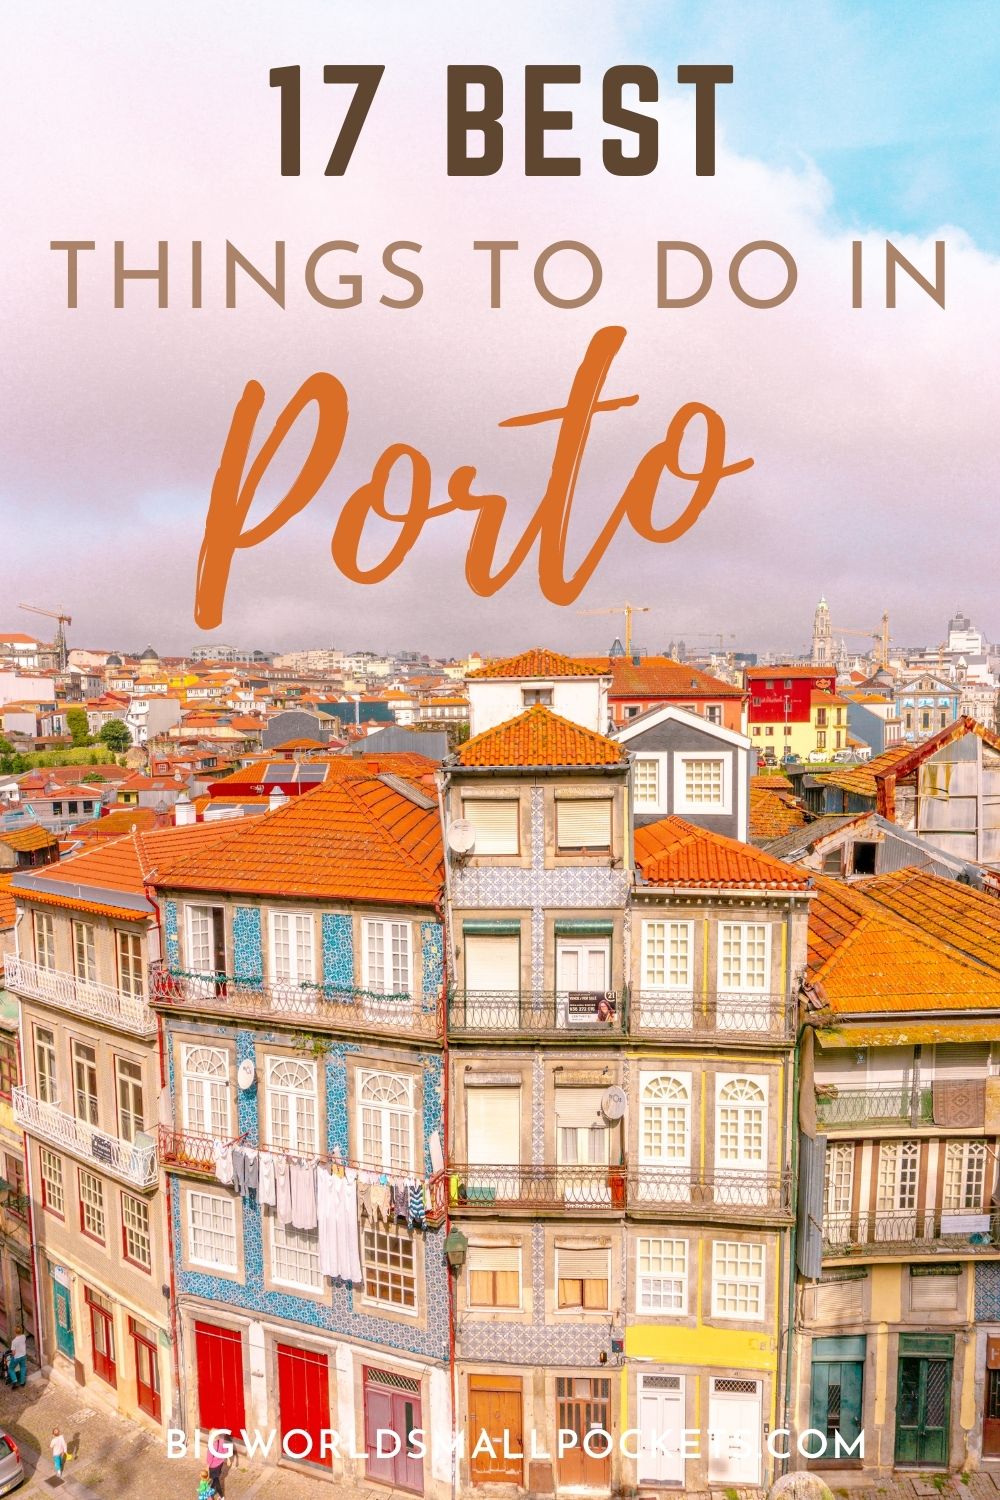 17 Best Things to Do in Porto, Portugal